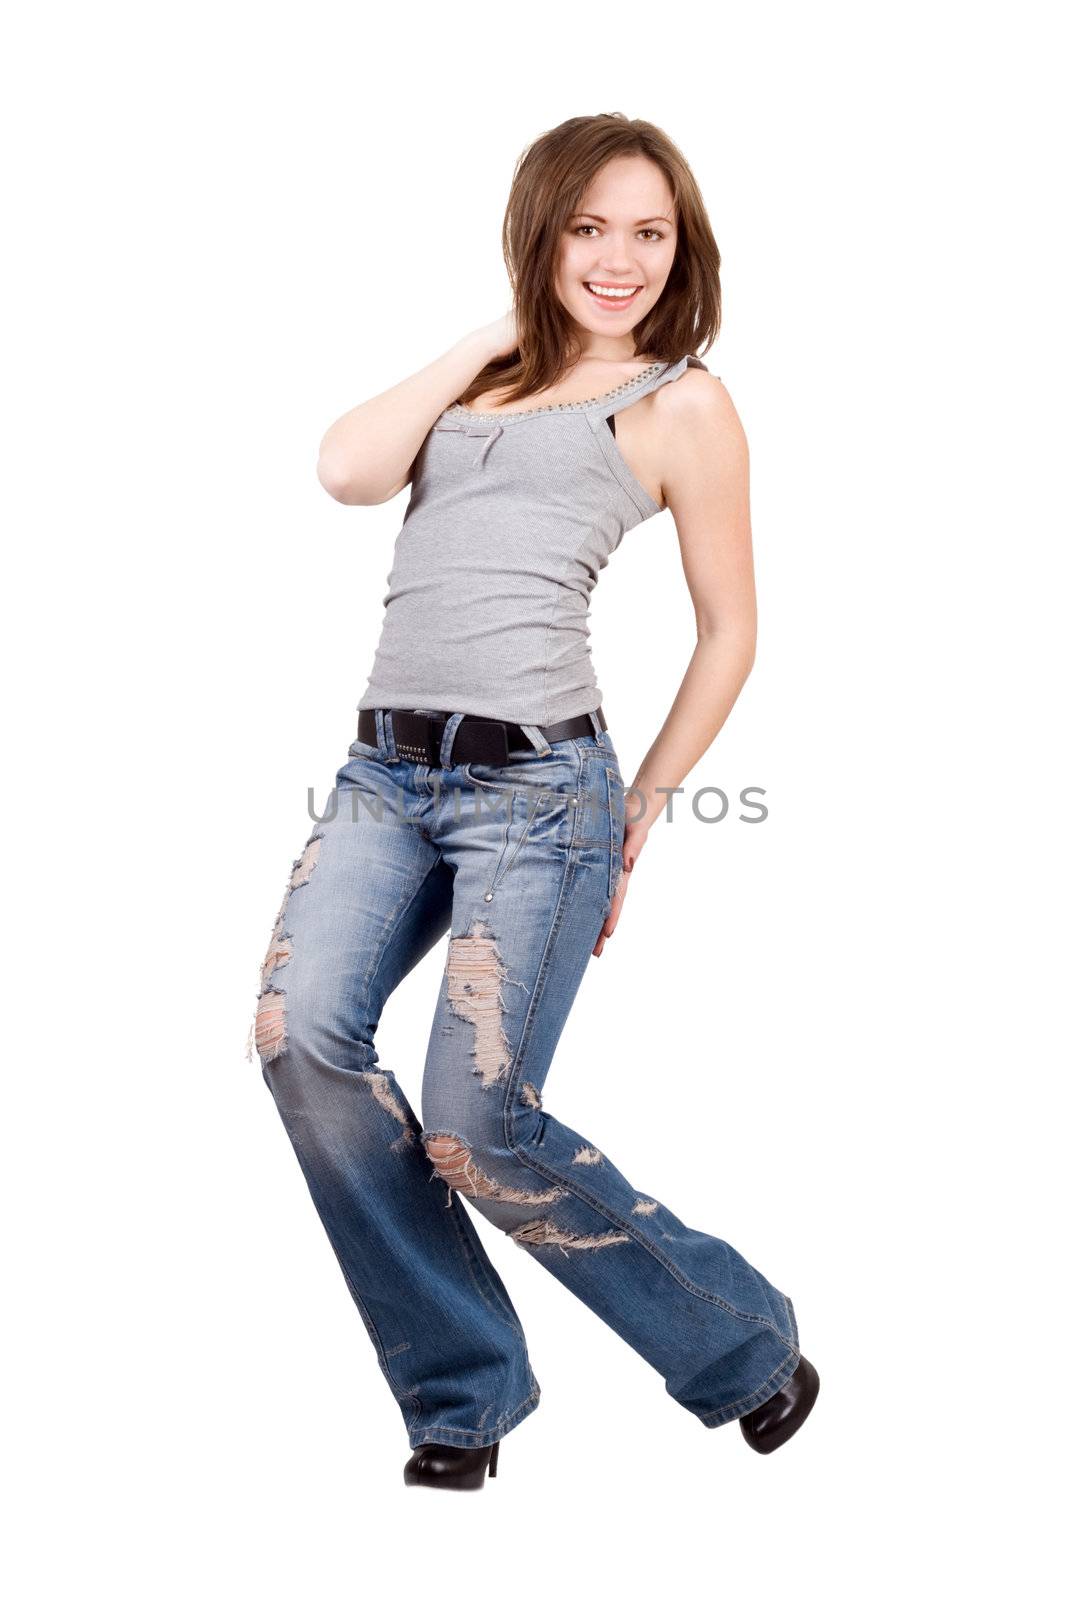 Smiling young woman in a blue jeans. Isolated